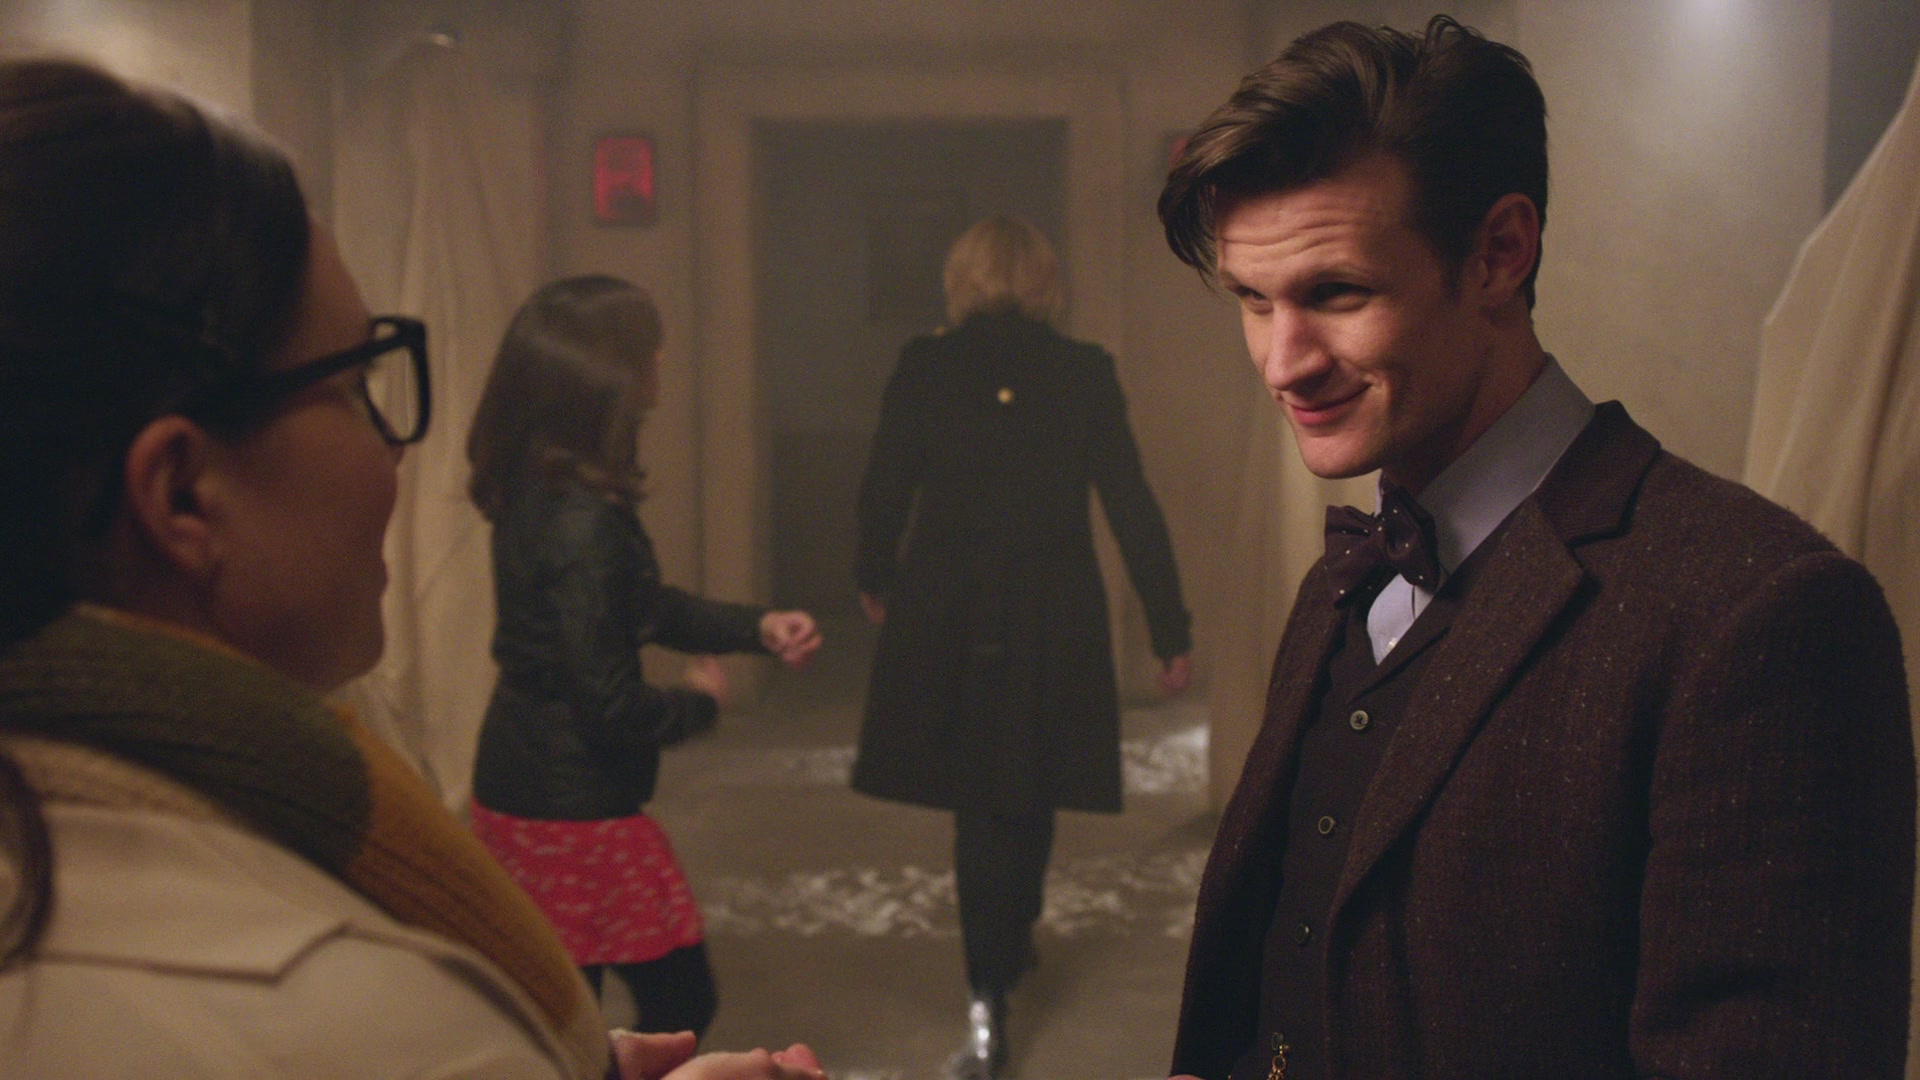 DayOfTheDoctor-Caps-0340.jpg